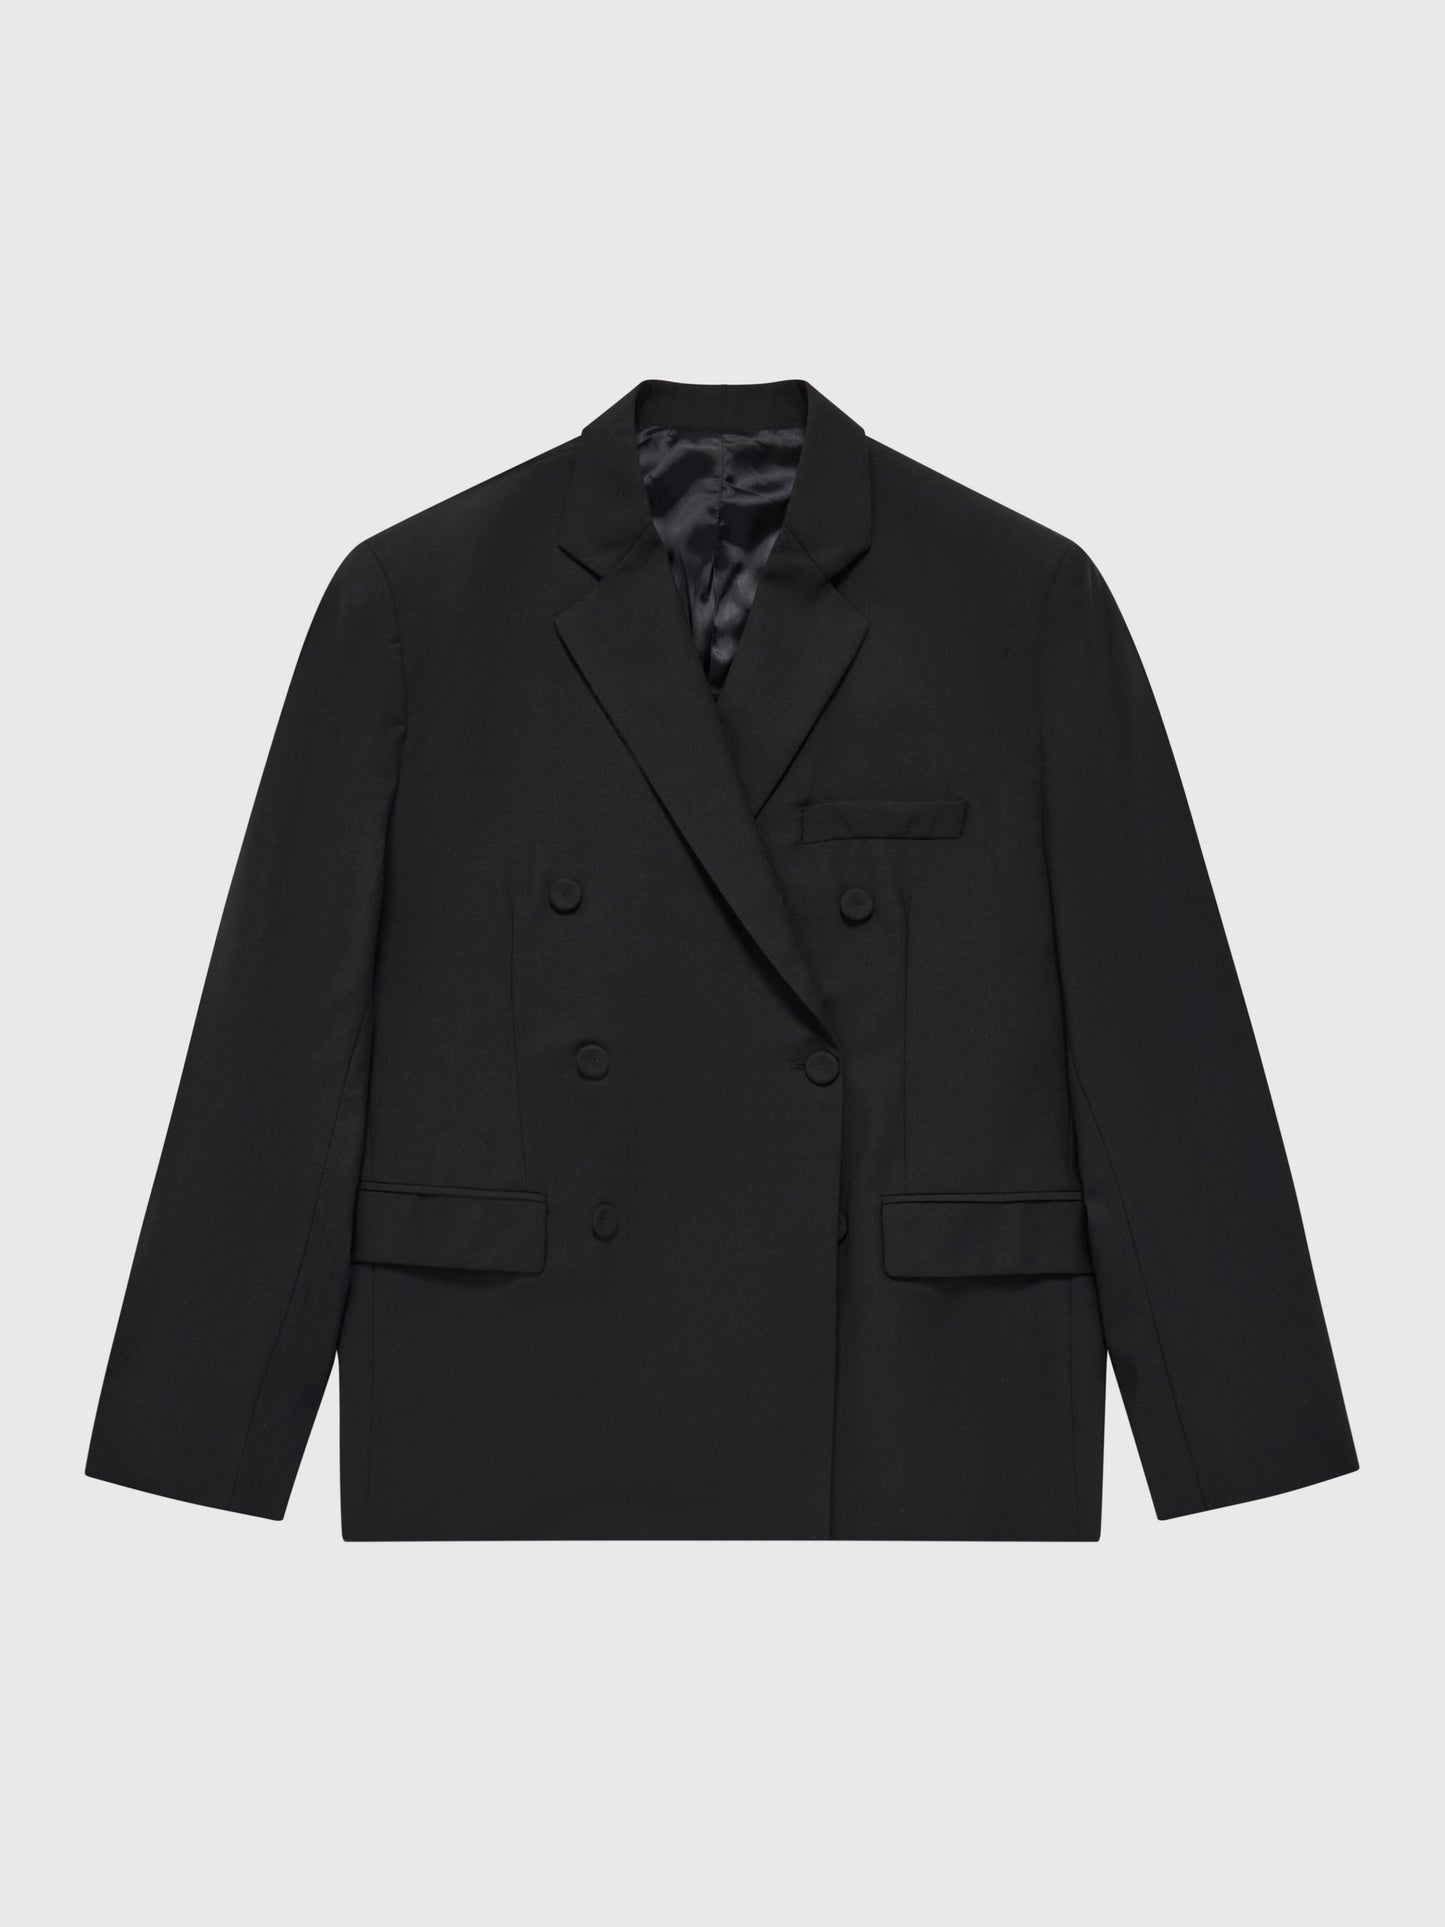 Doubled-Breasted Jacket in Black